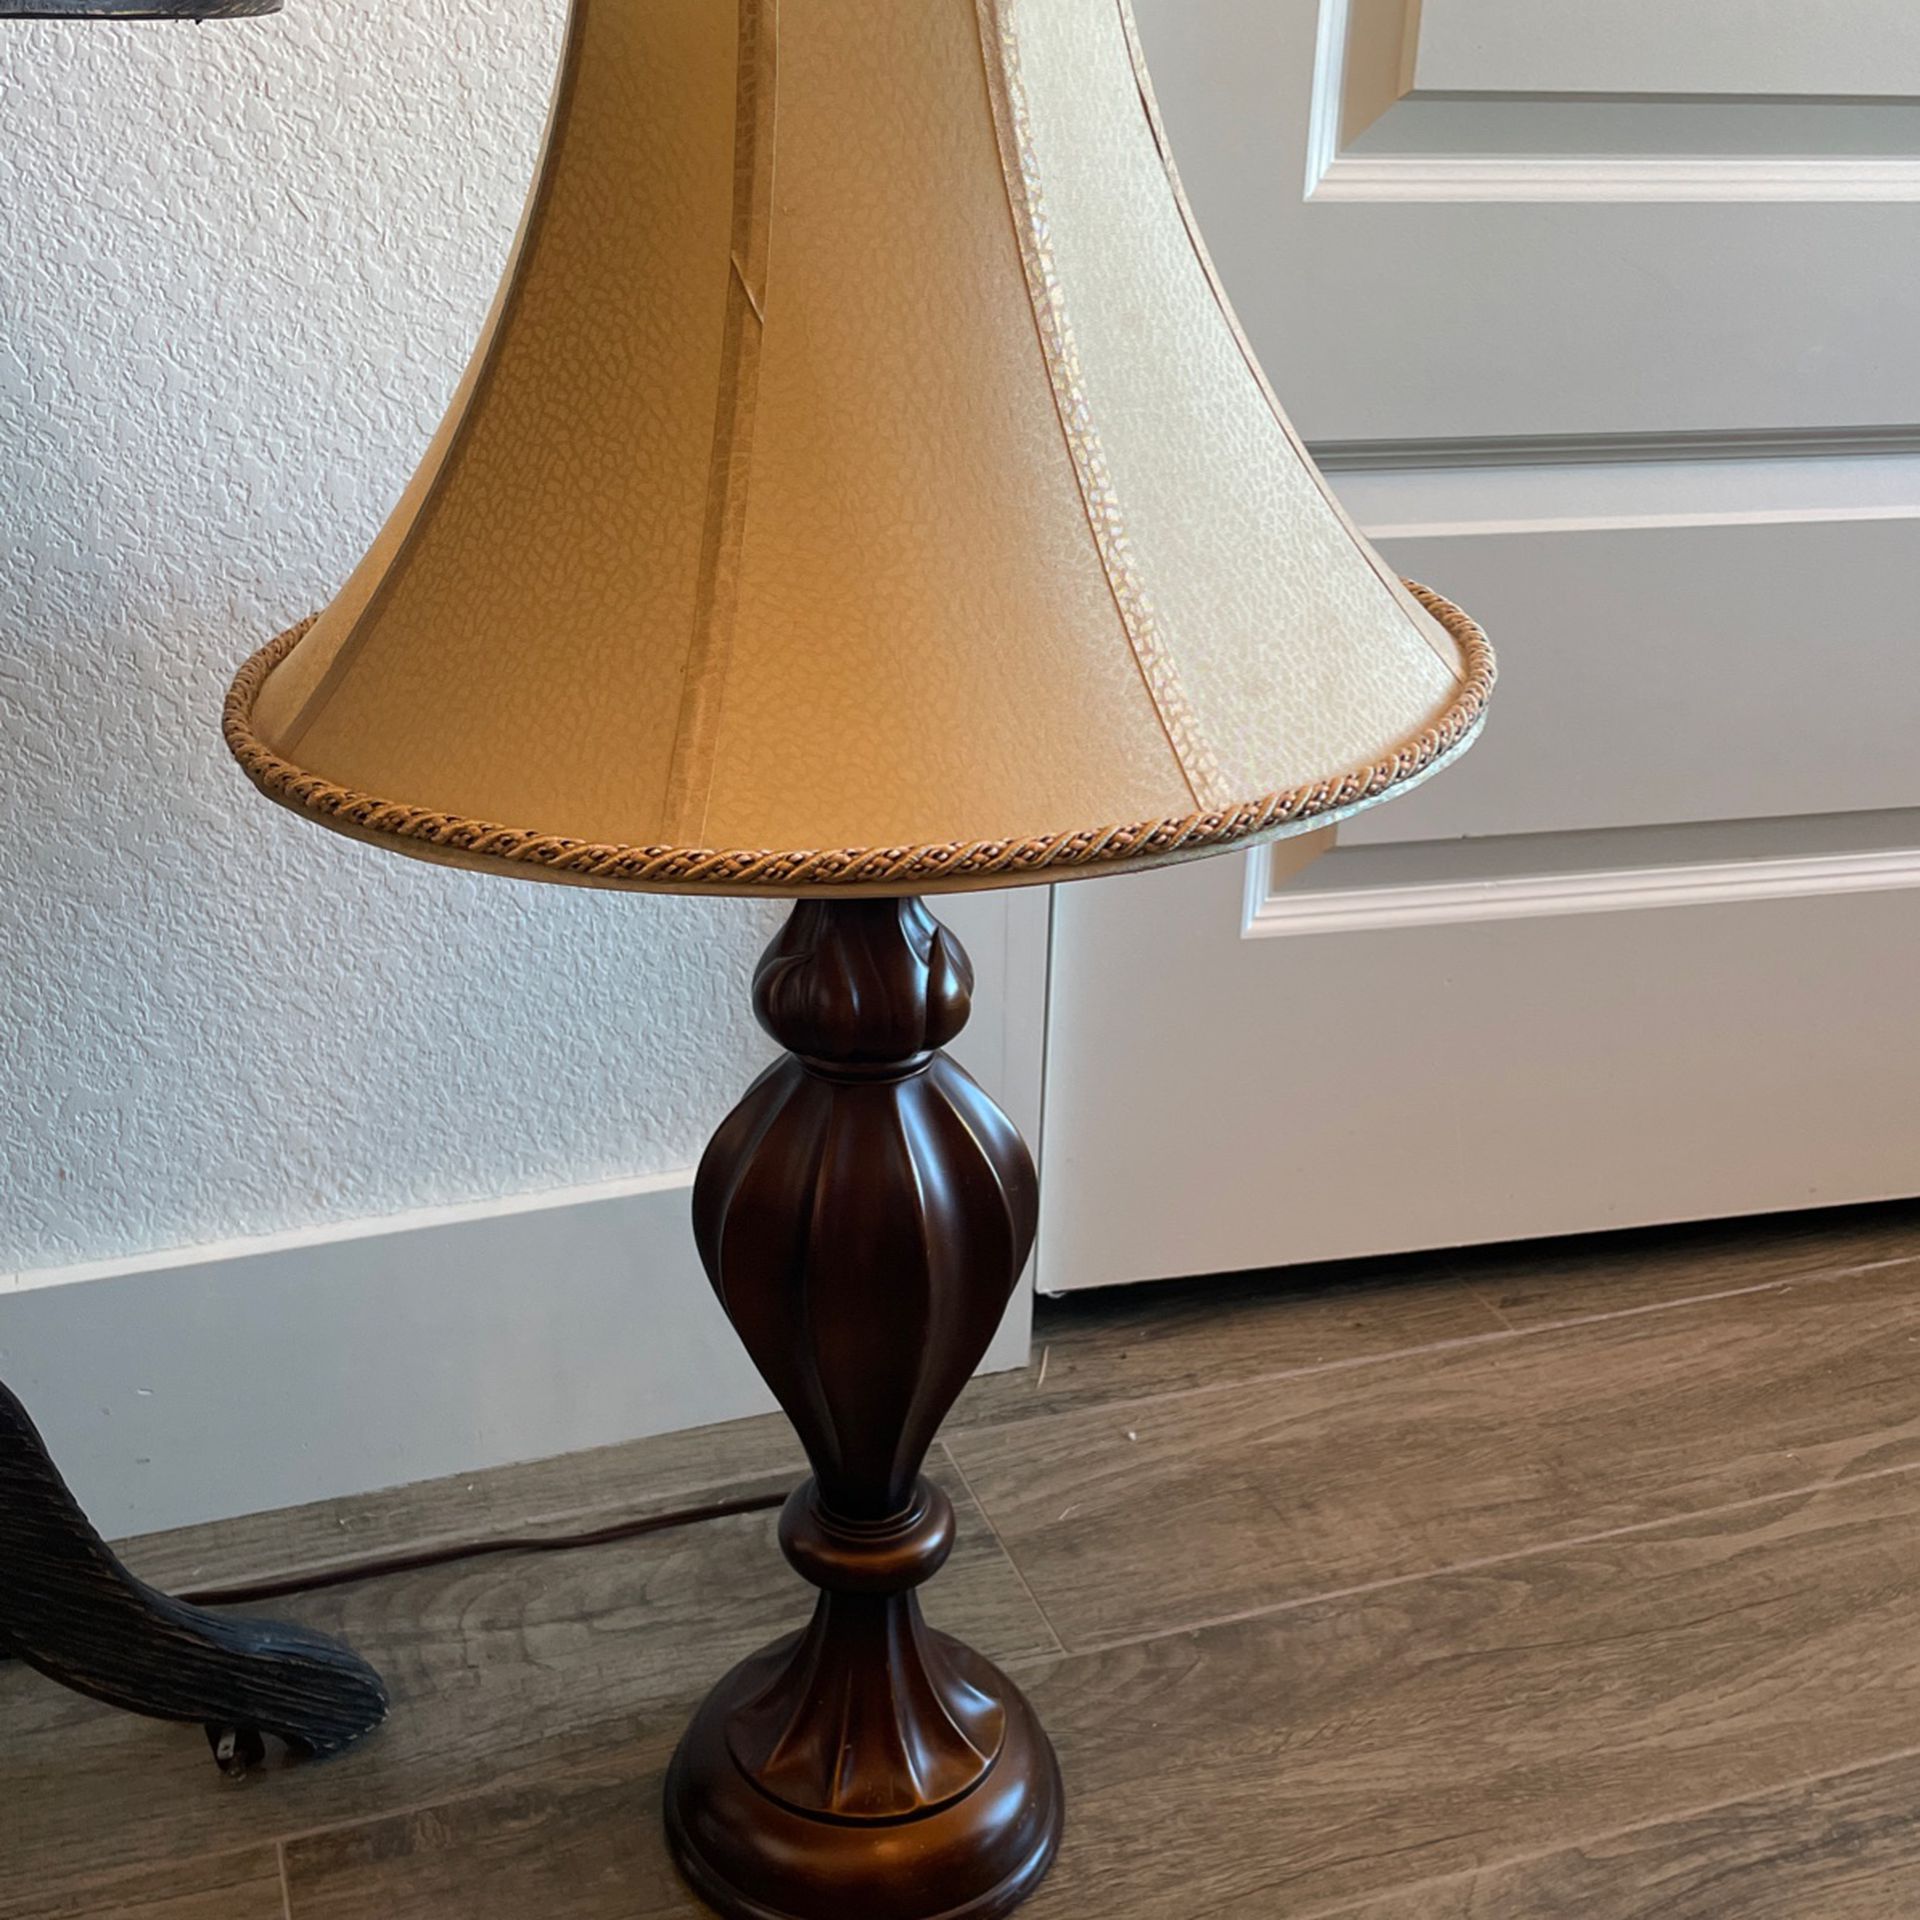 Lamp and End Table